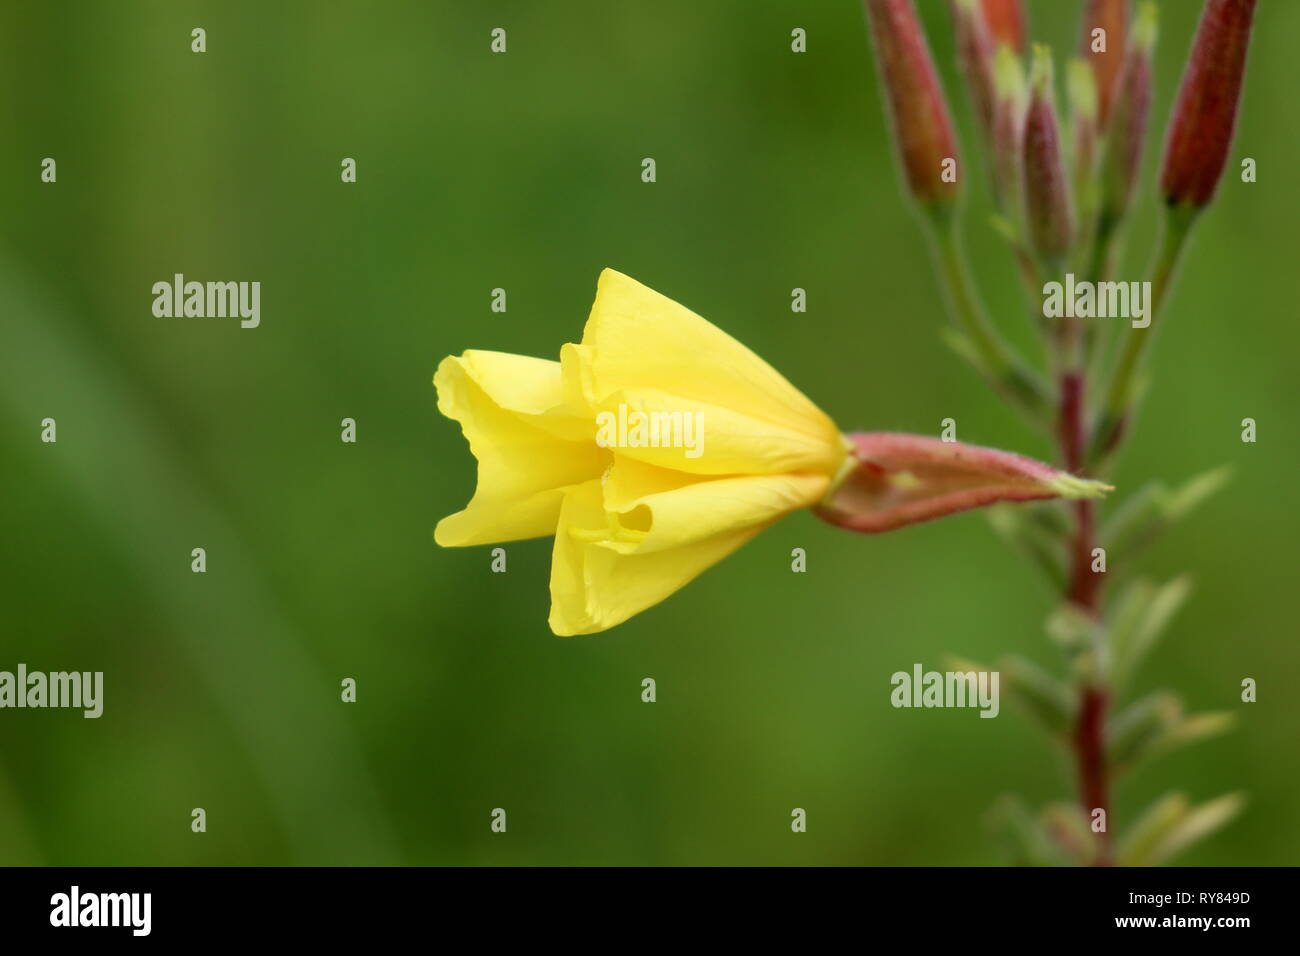 Common evening primrose or Oenothera biennis or Evening star or Sun drop or Weedy evening primrose or German rampion or Hog weed or Kings cure all Stock Photo